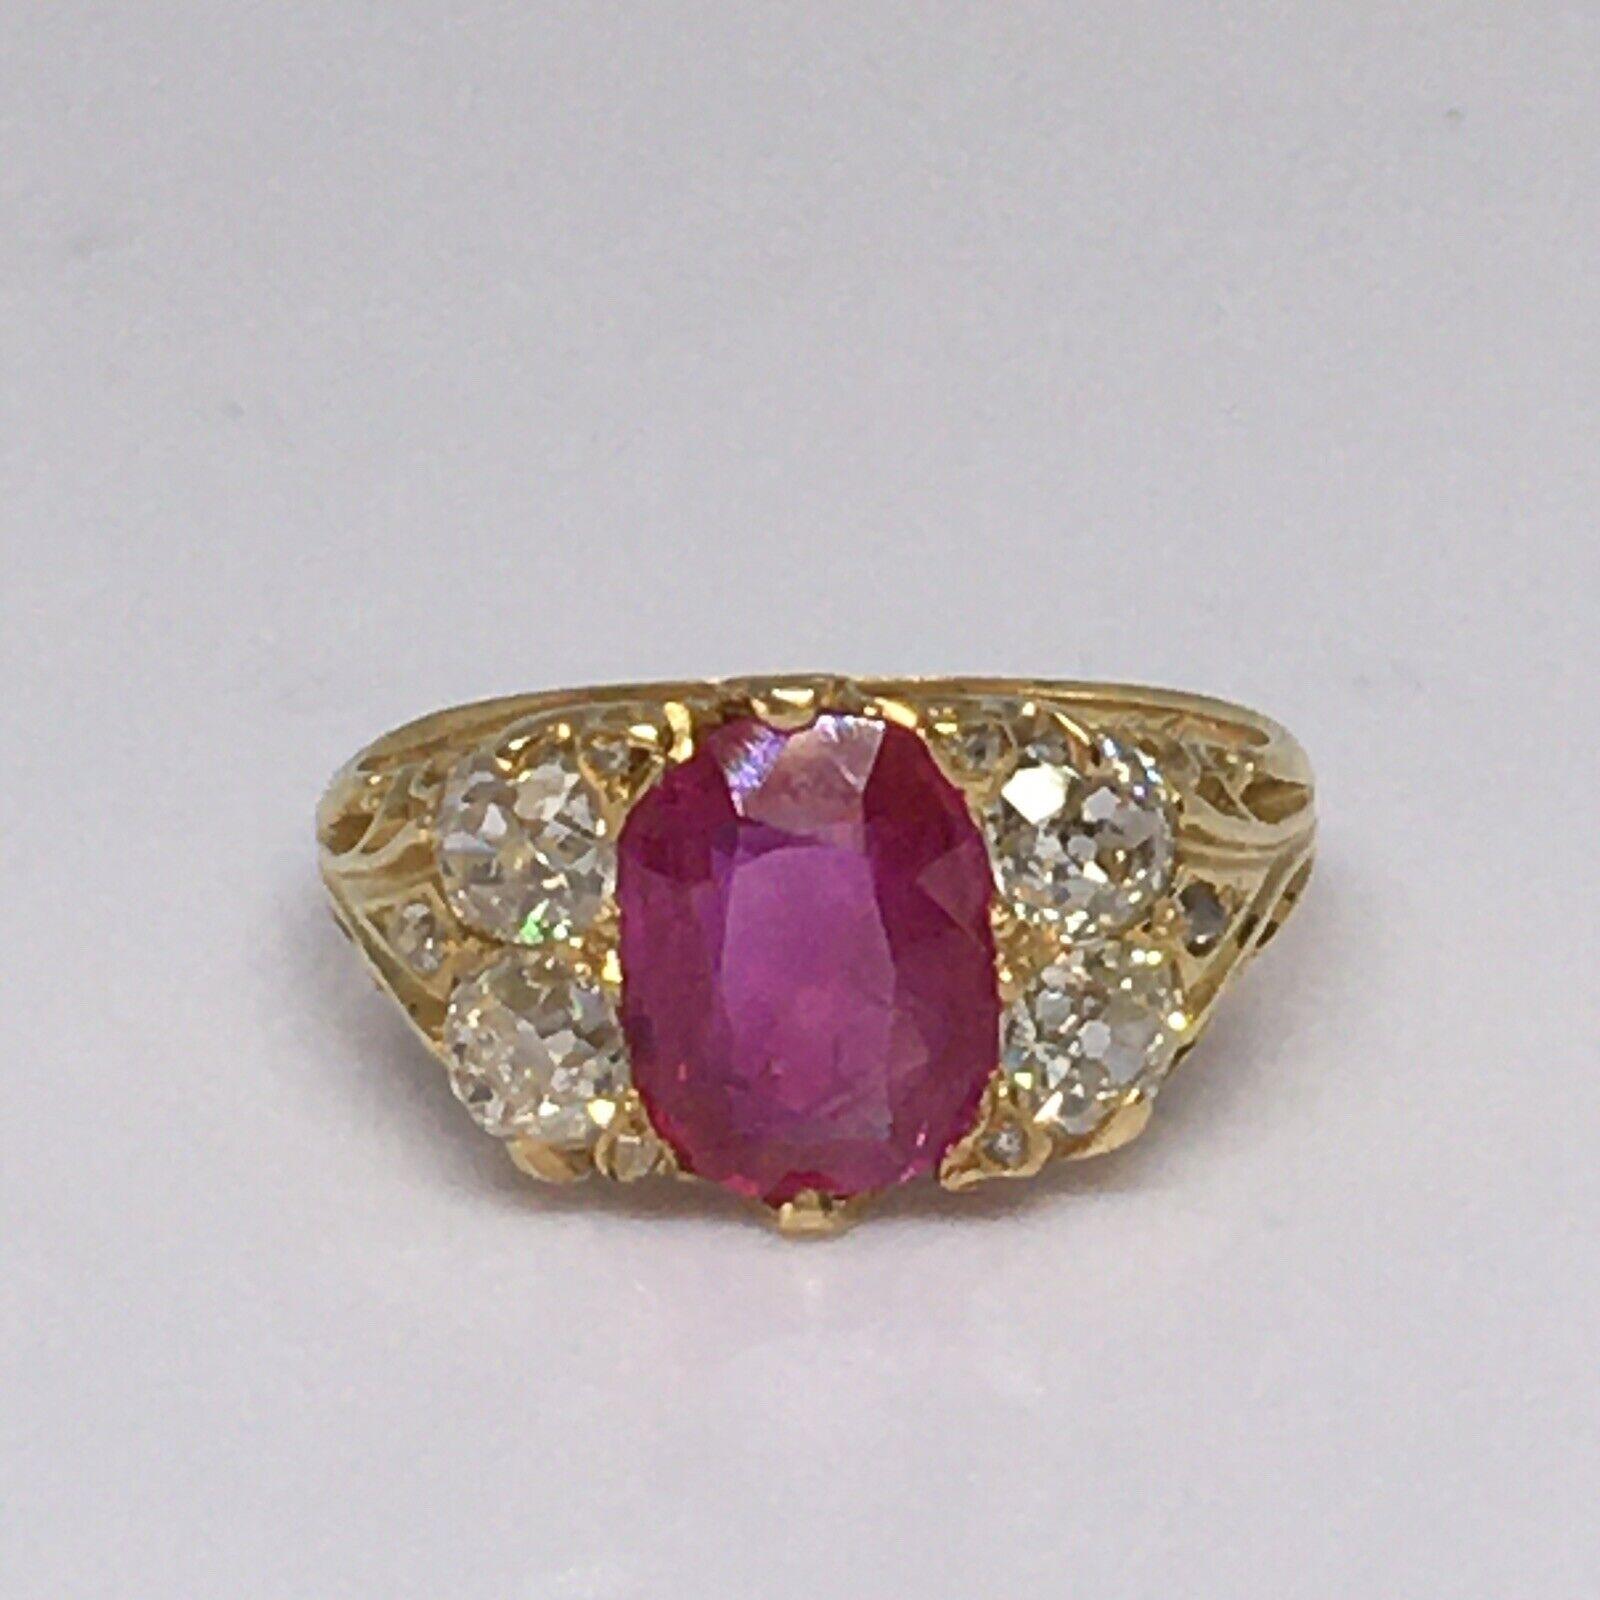 Victorian circa 1869 Unheated Burmese Ruby Diamond Ring 18k Antique Yellow Gold In Good Condition For Sale In Santa Monica, CA